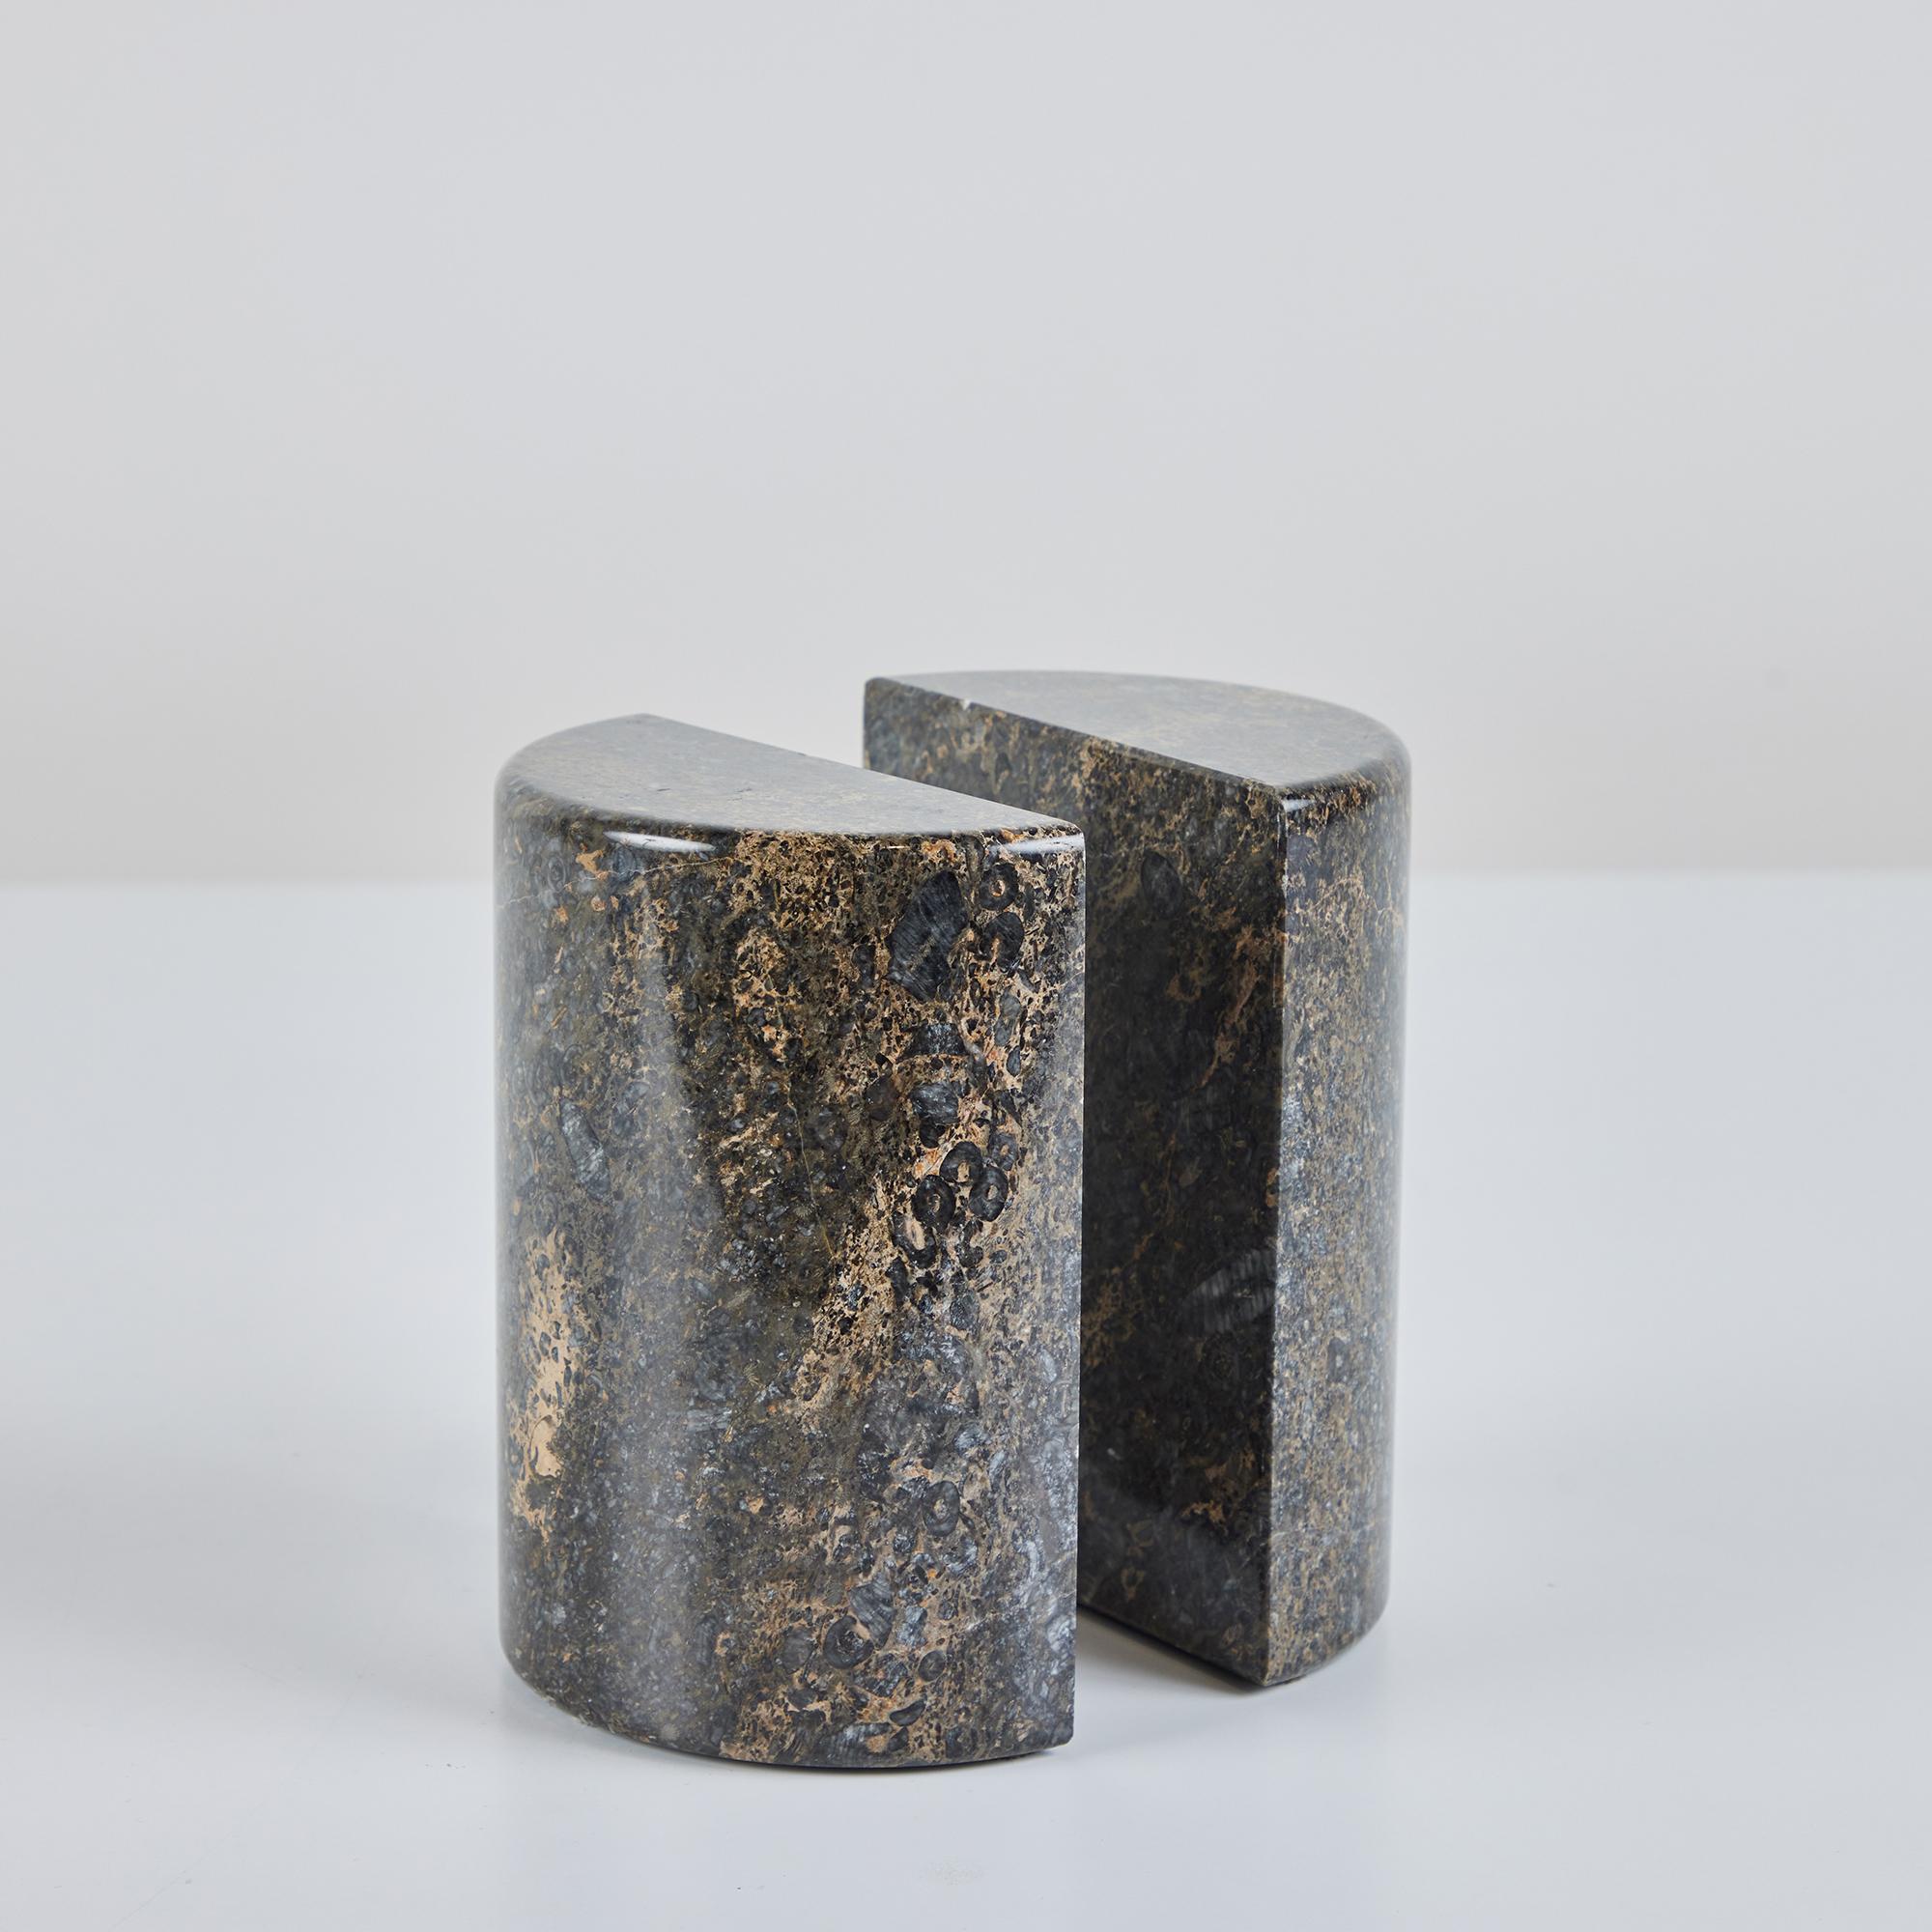 Pair of marble bookends feature a half circle shape with smooth rounded edges. When placed together they form an elongated circle. The stone showcases varying speckled tones of dark gray brown and black with tan and cream veining throughout the